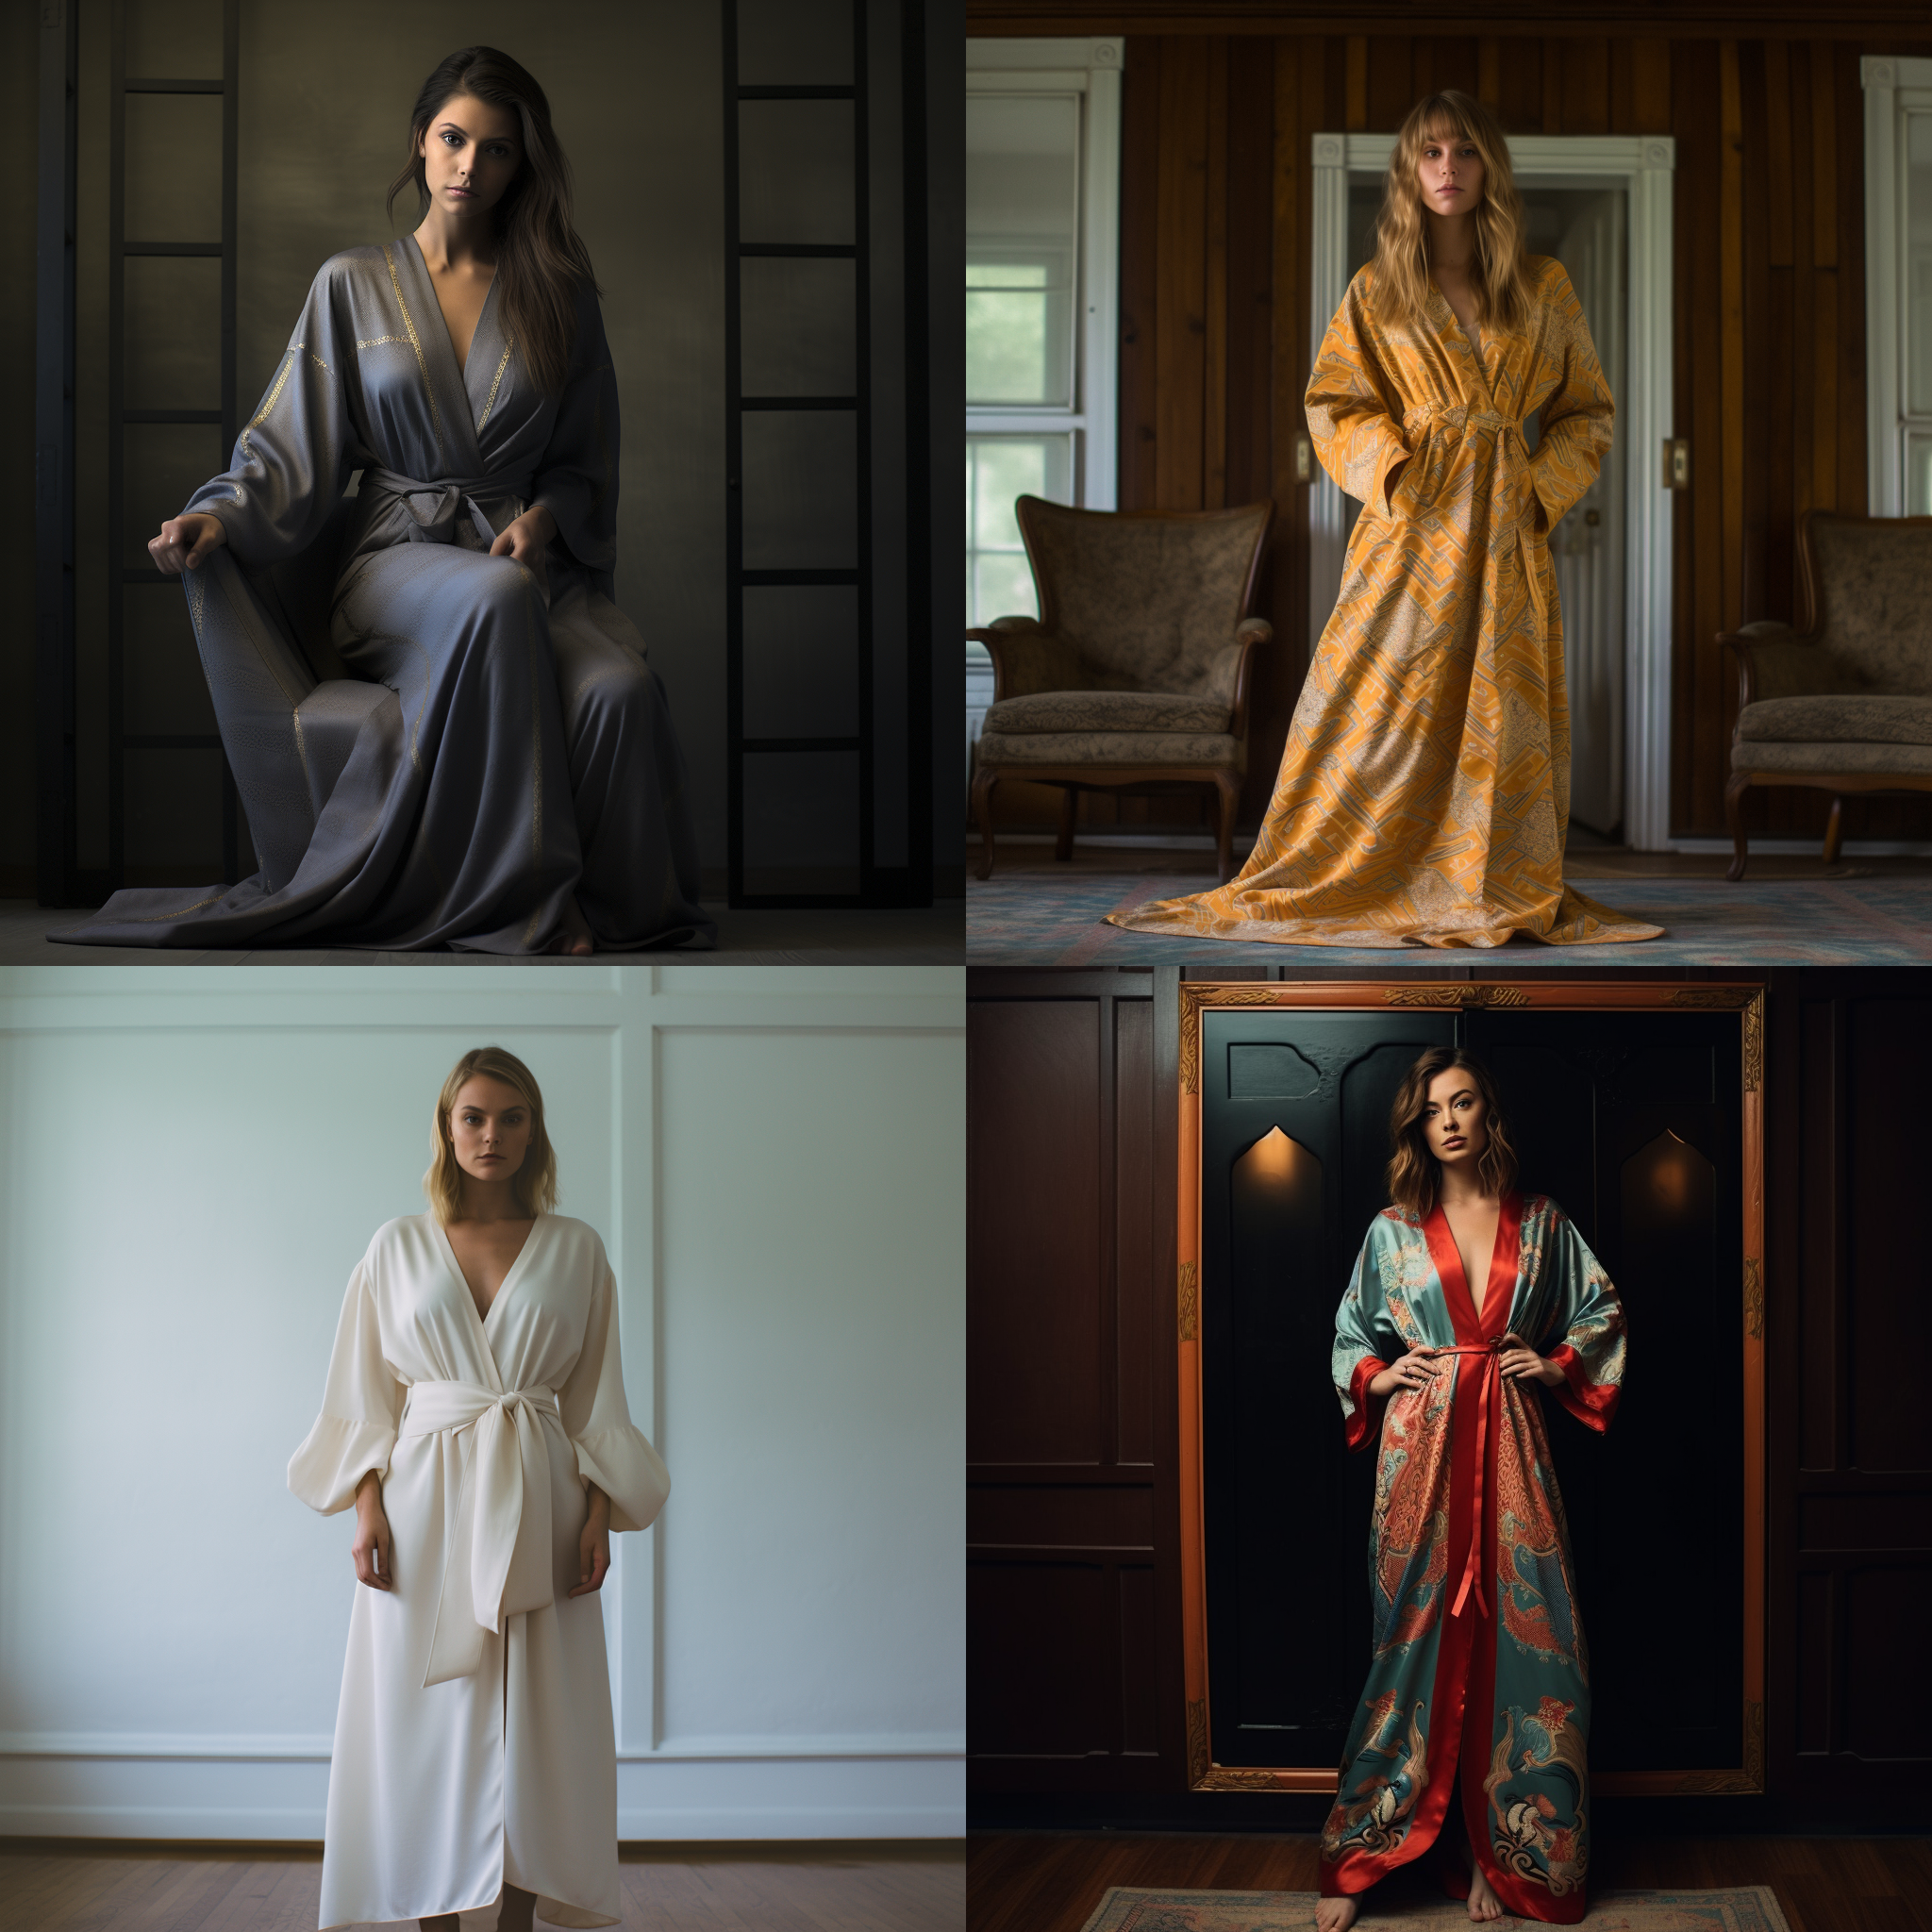 SILK Robes are back